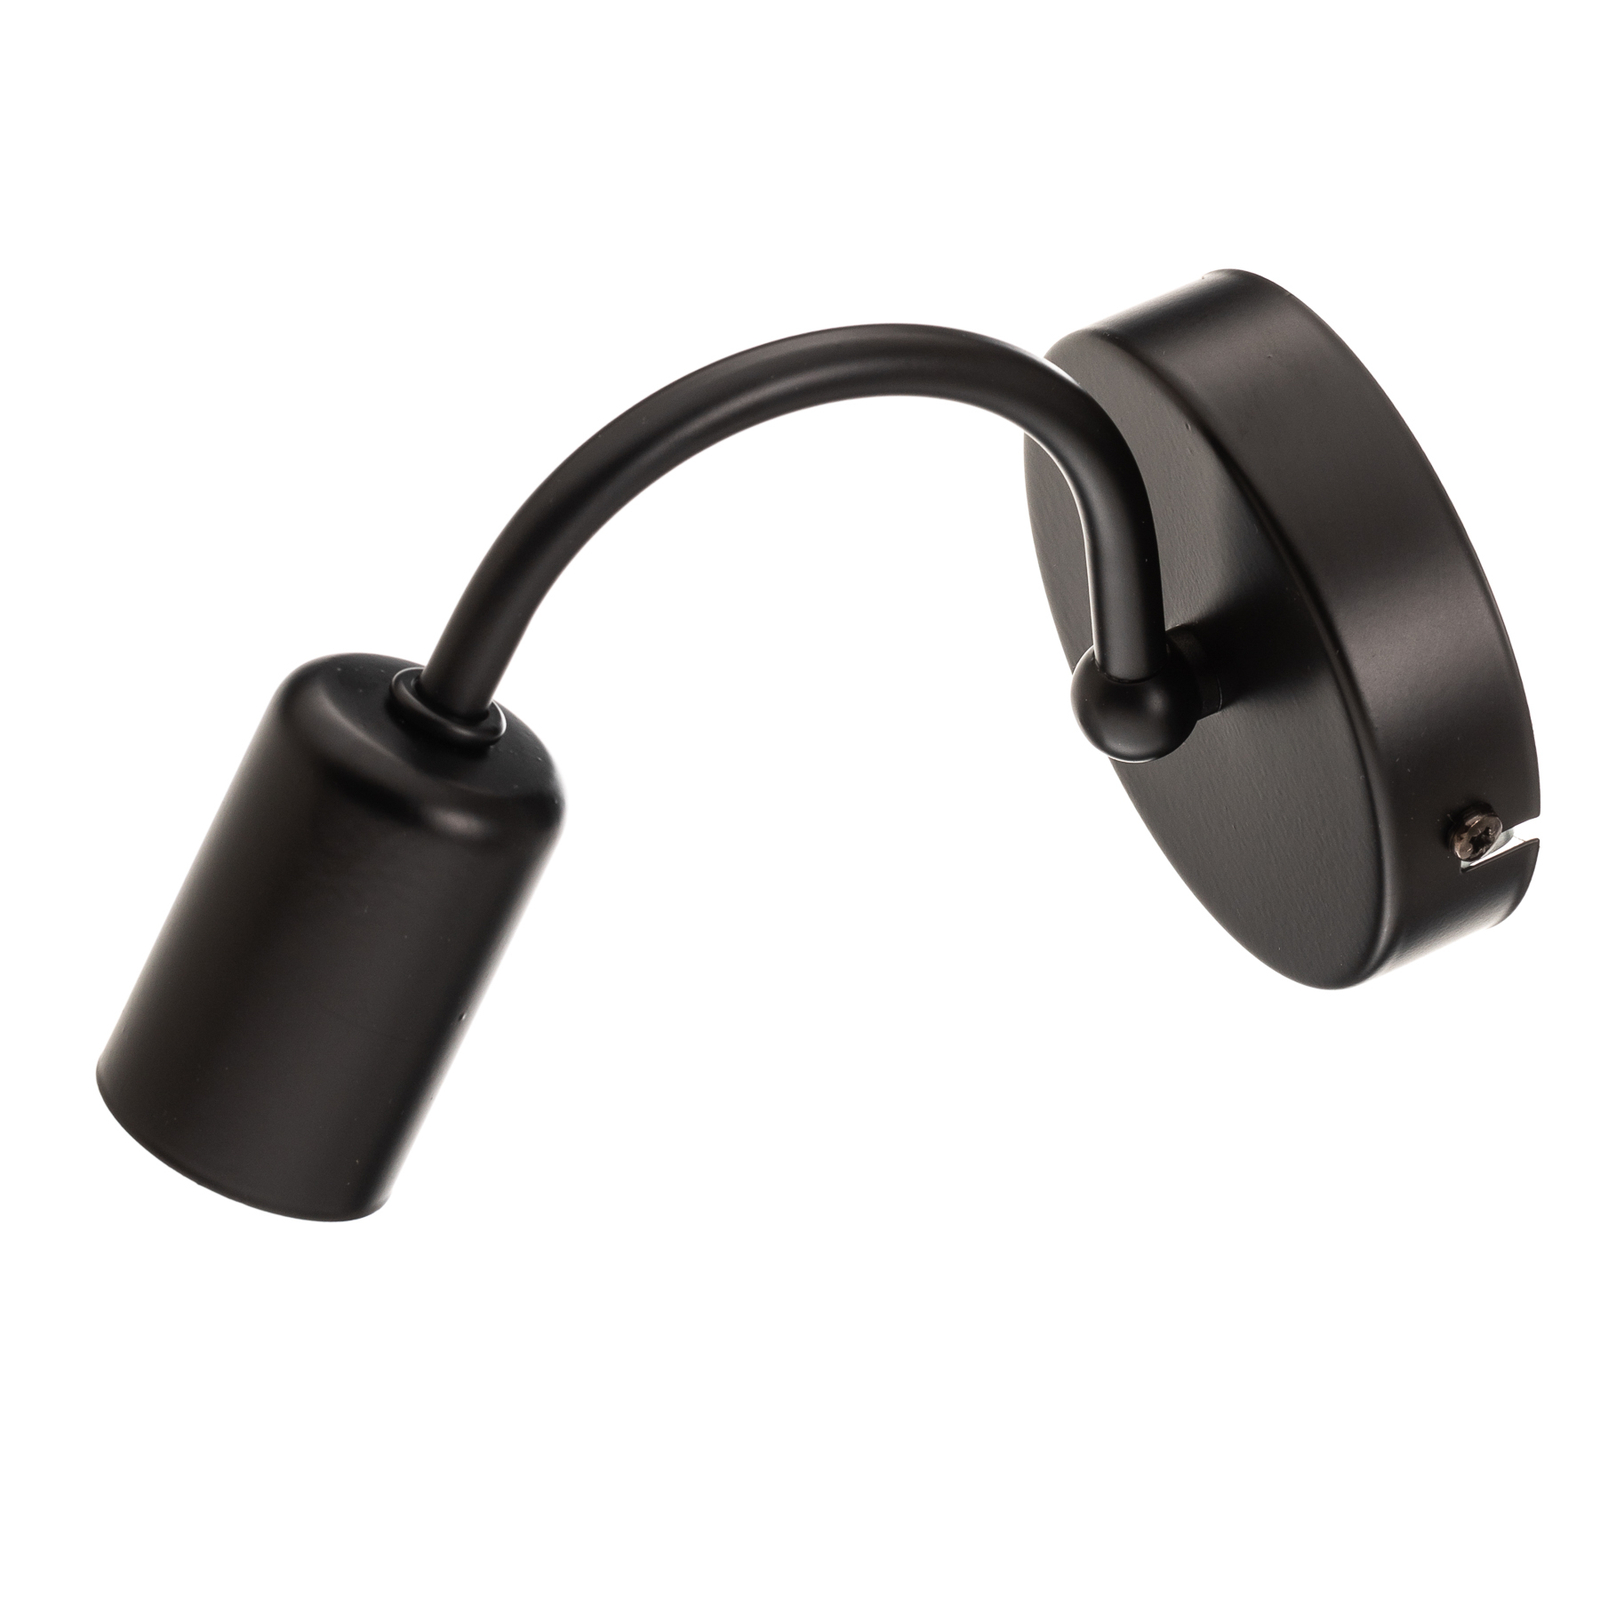 Milo wall light in black without lampshade